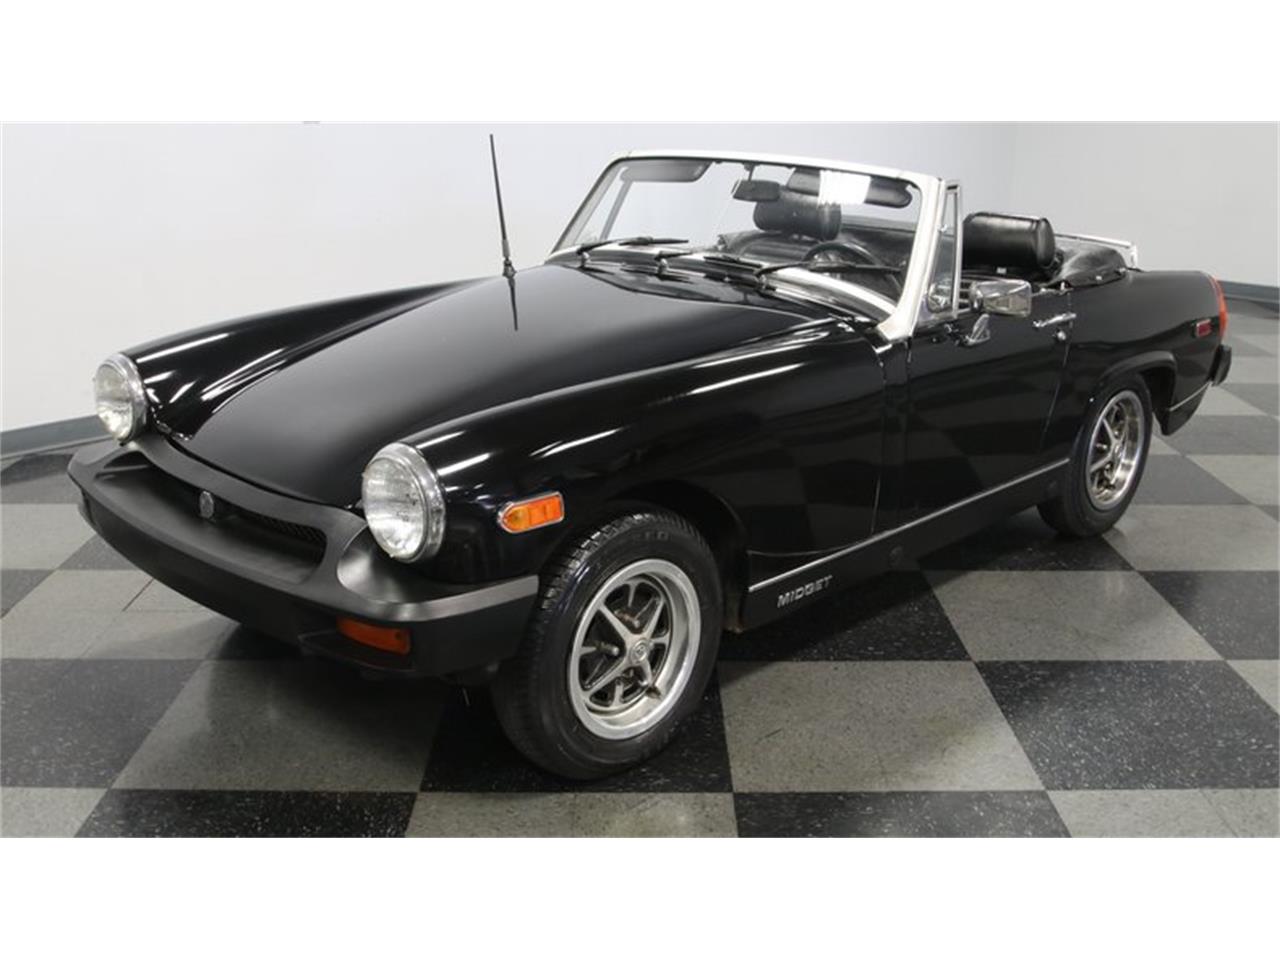 1978 MG Midget for sale in Concord, NC / classiccarsbay.com